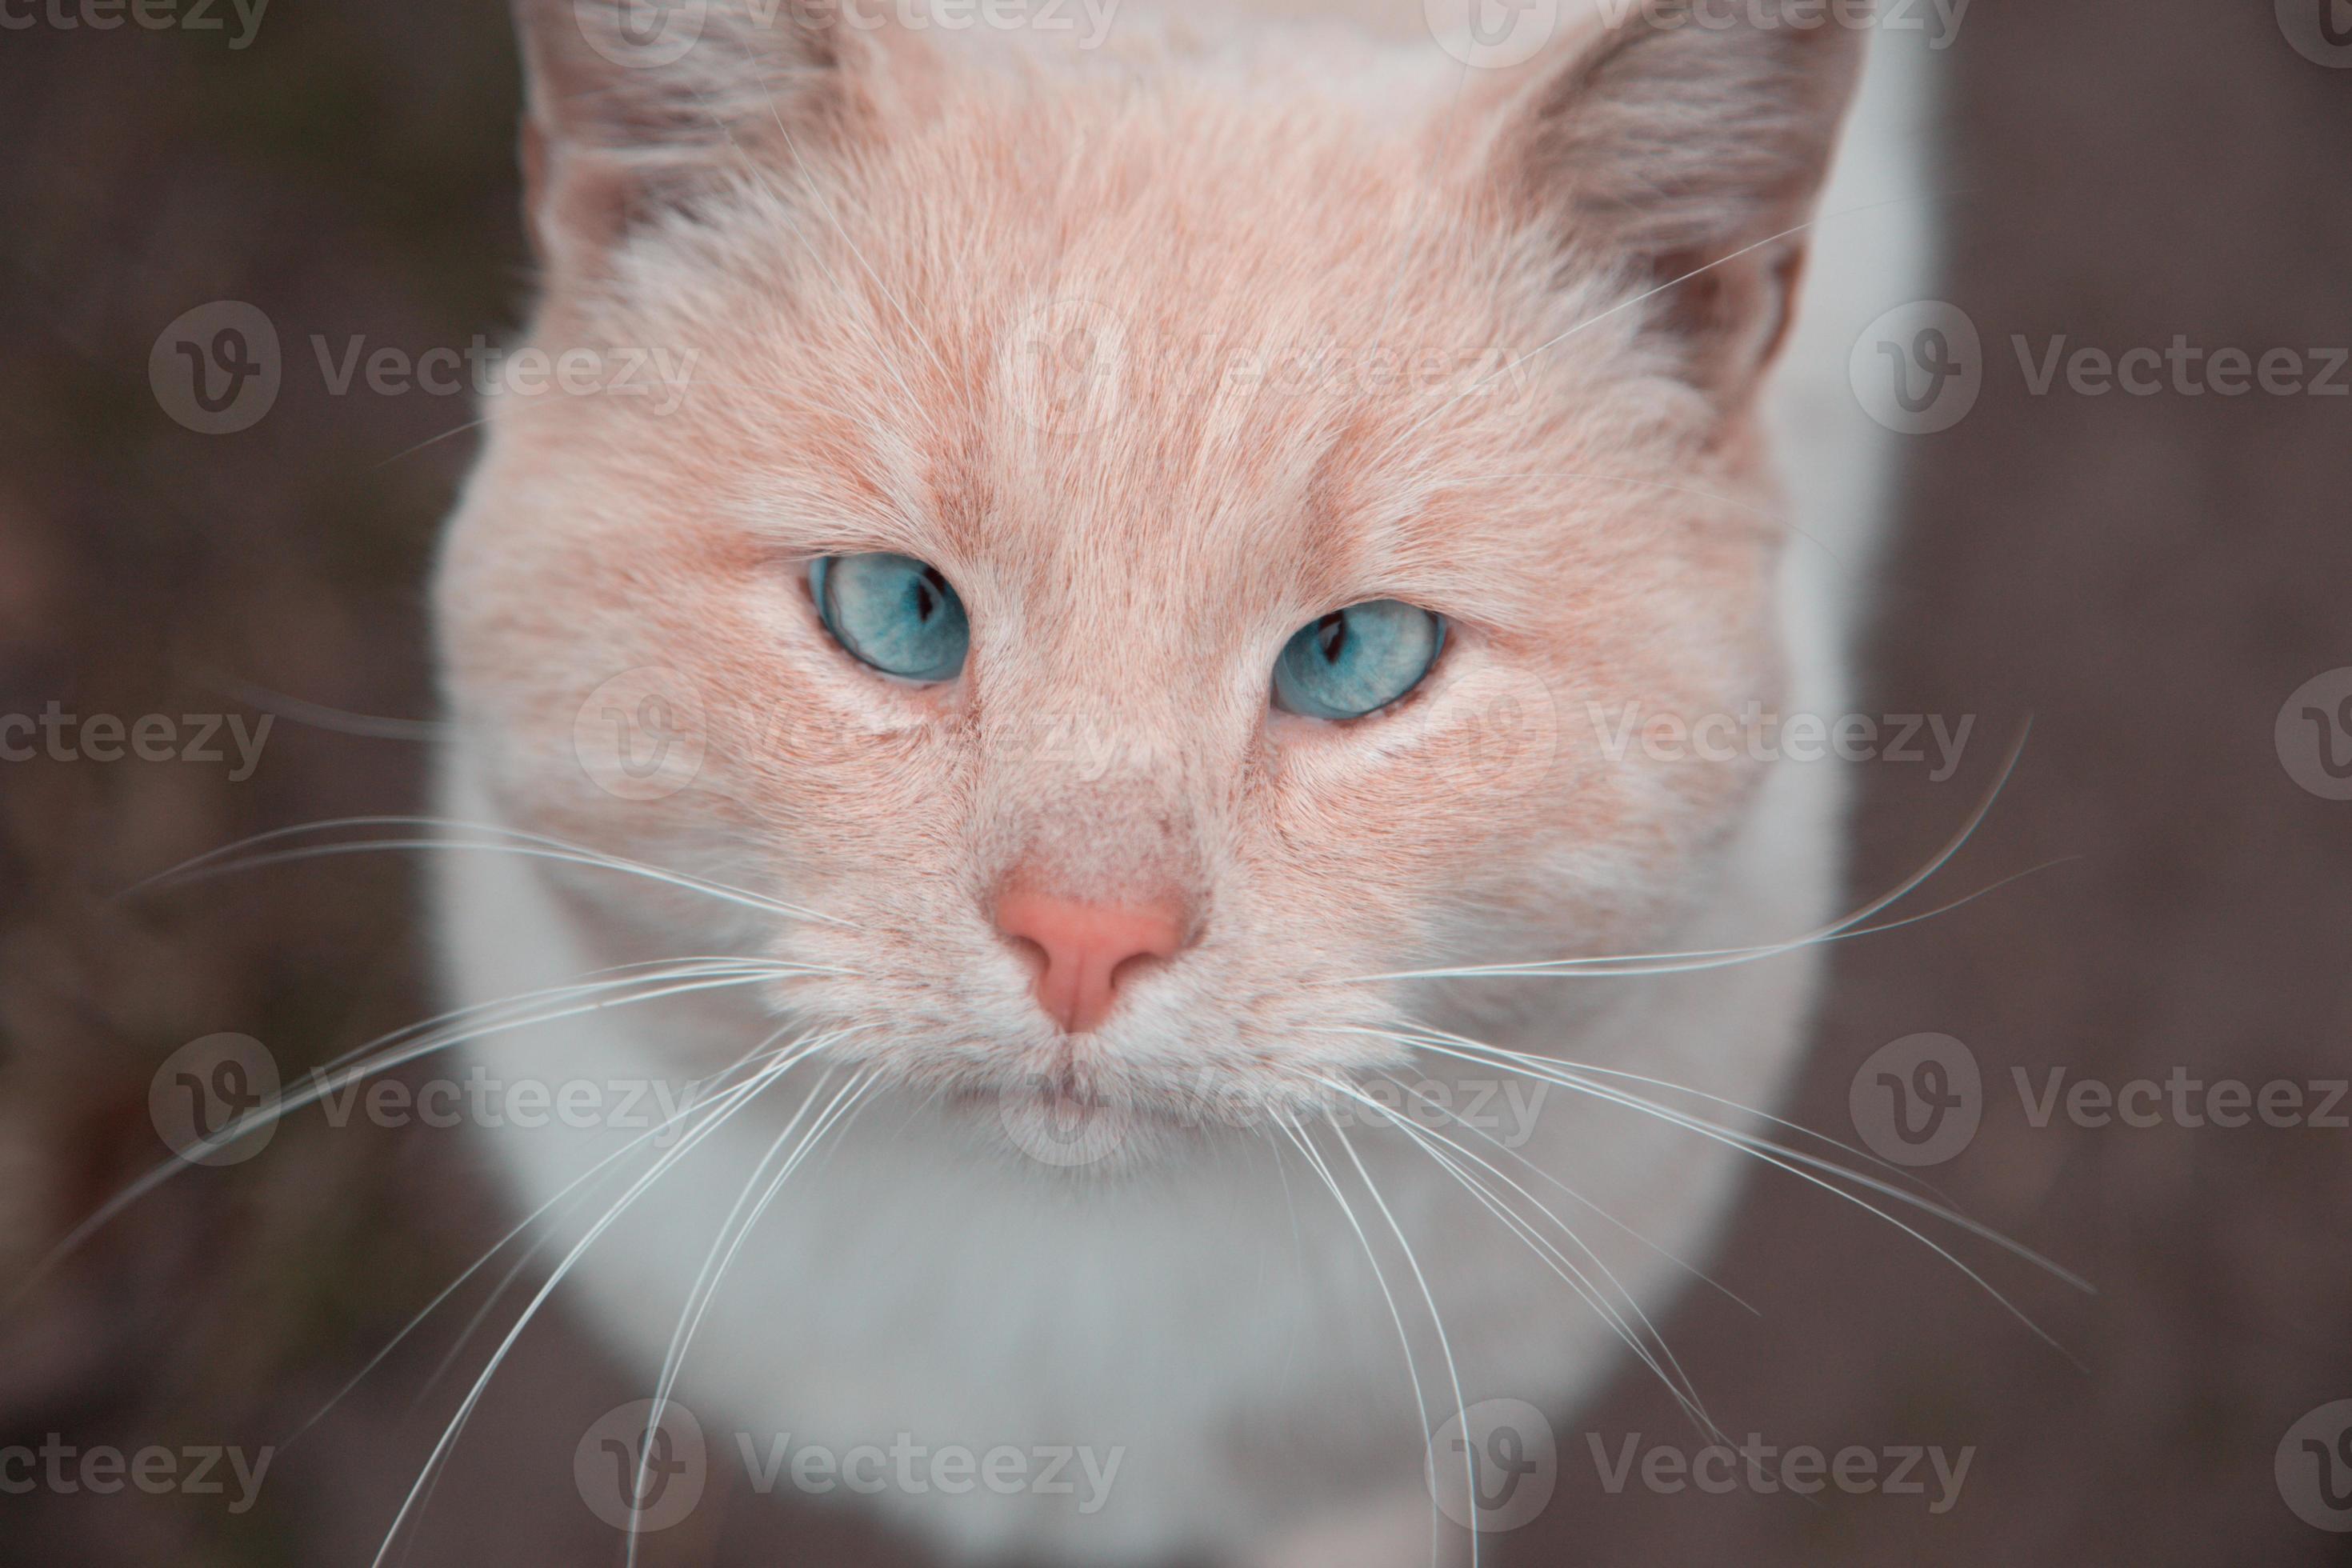 White And Orange Cat With Blue Eyes Looking At Camera Stock Photo At Vecteezy